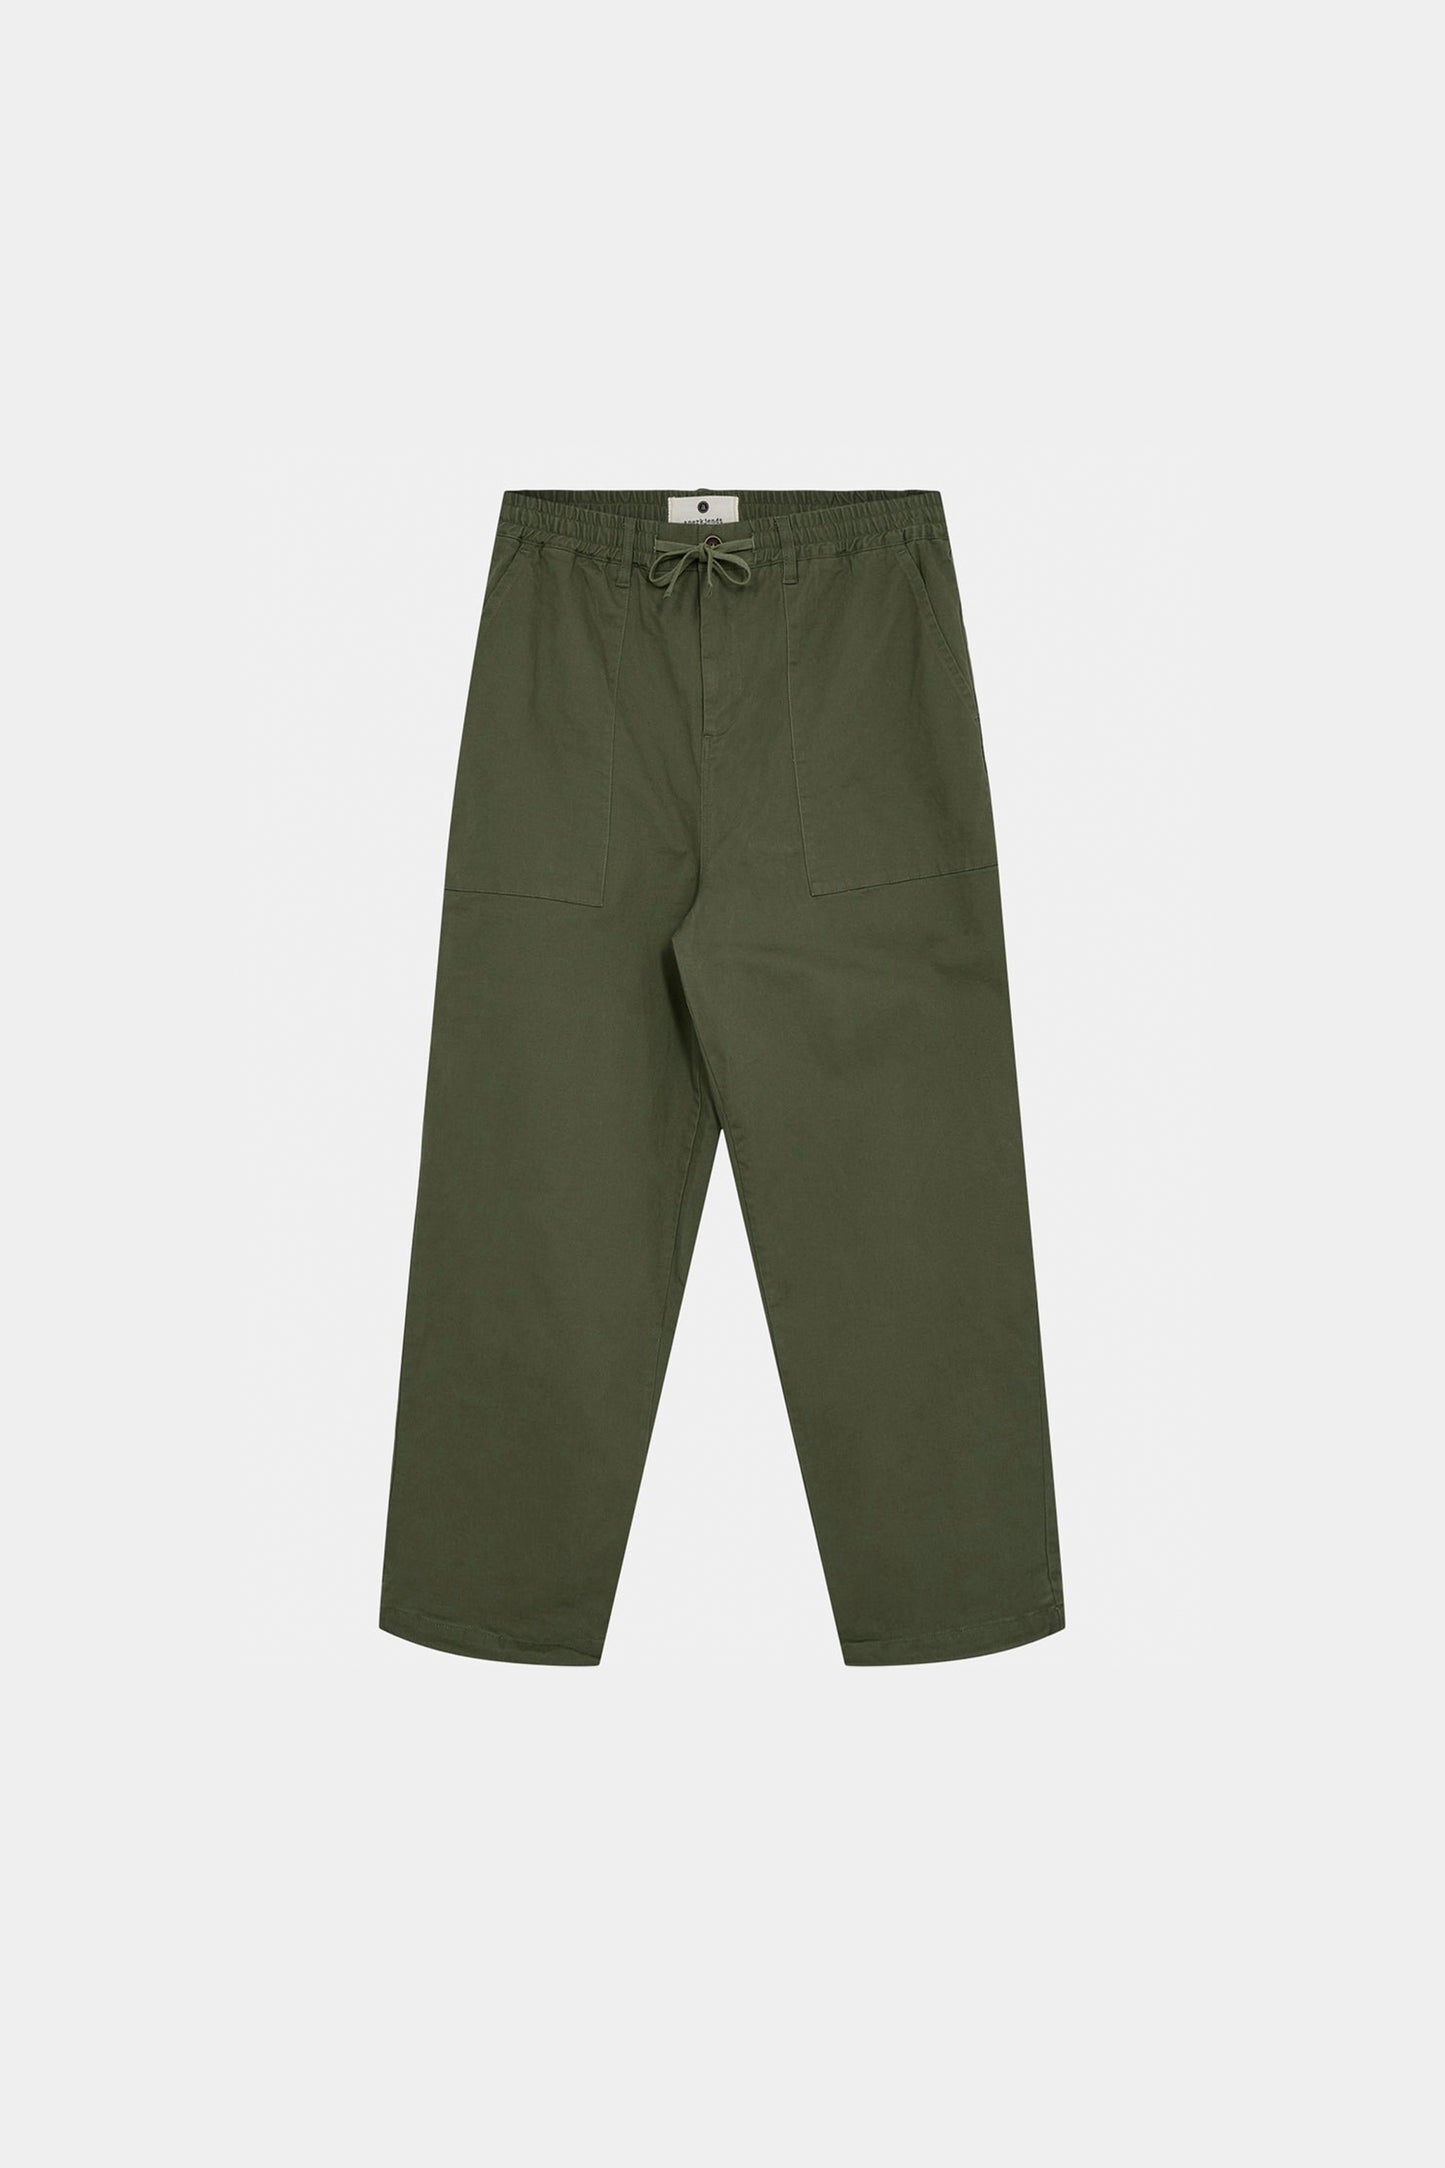 RVCA Weekend Stretch Chino Pant - Navy Marine - BUNKER